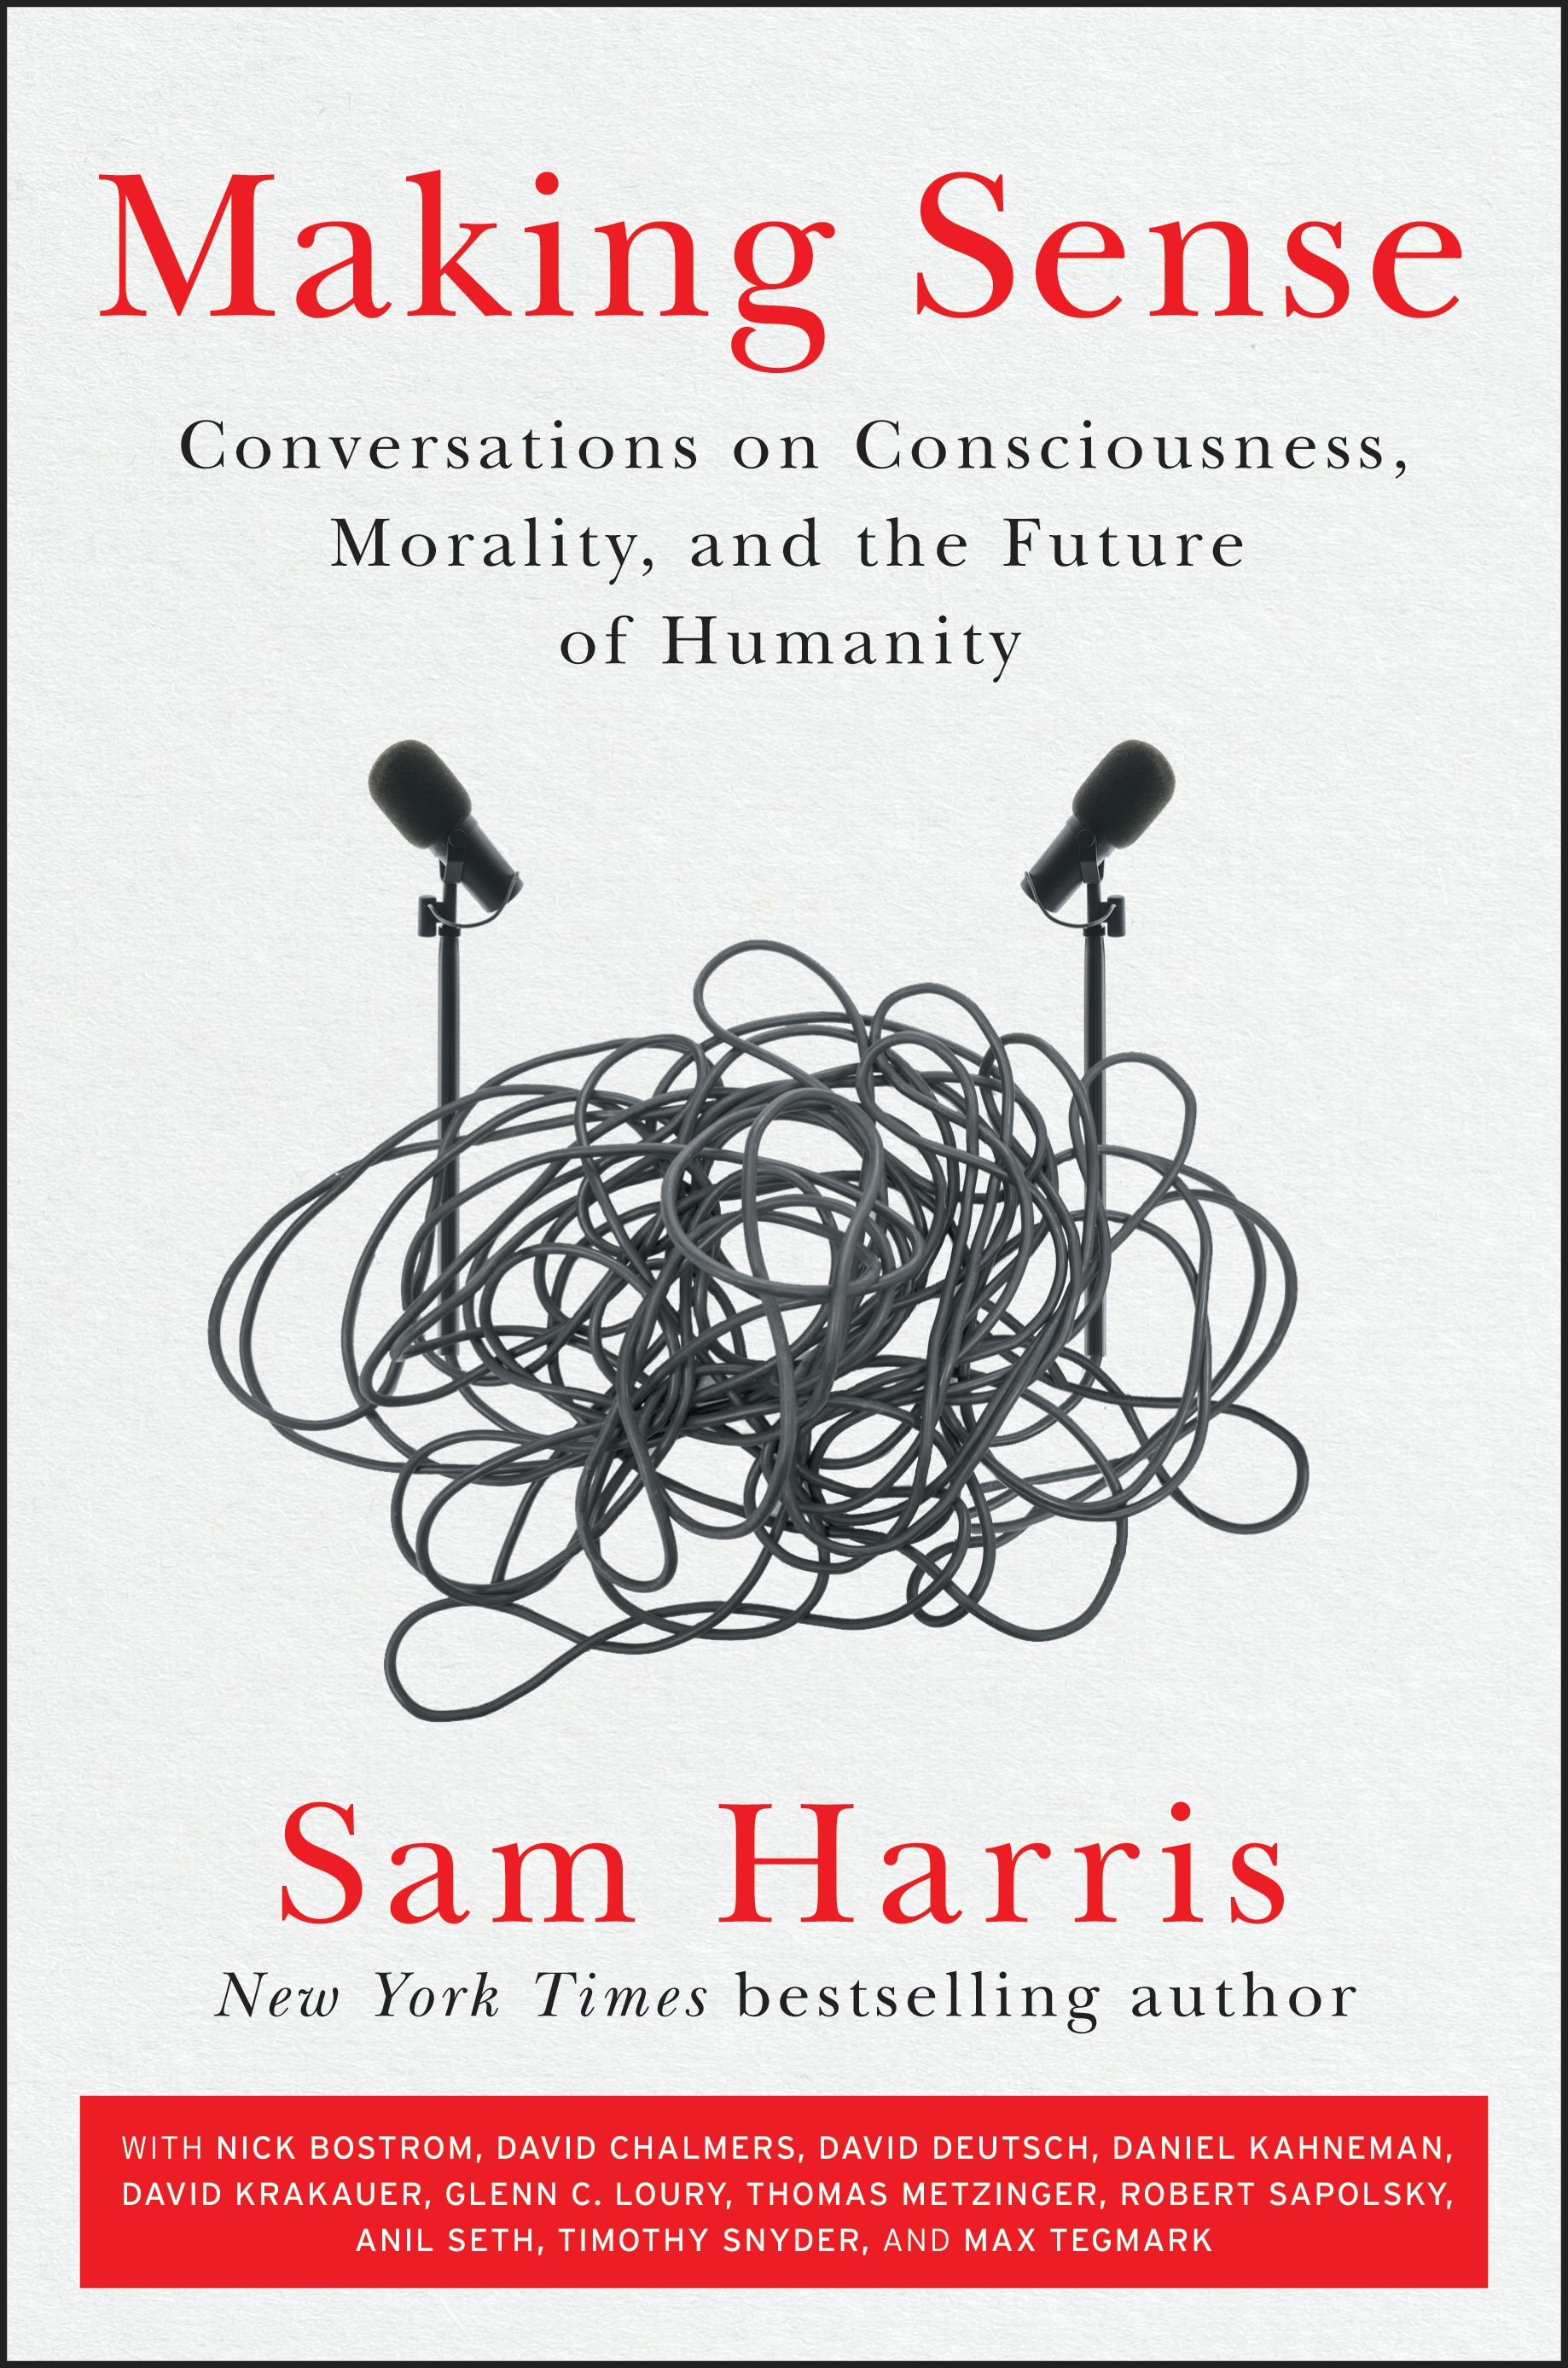 Cover of the book showing two microphones with the cables wrapped around them